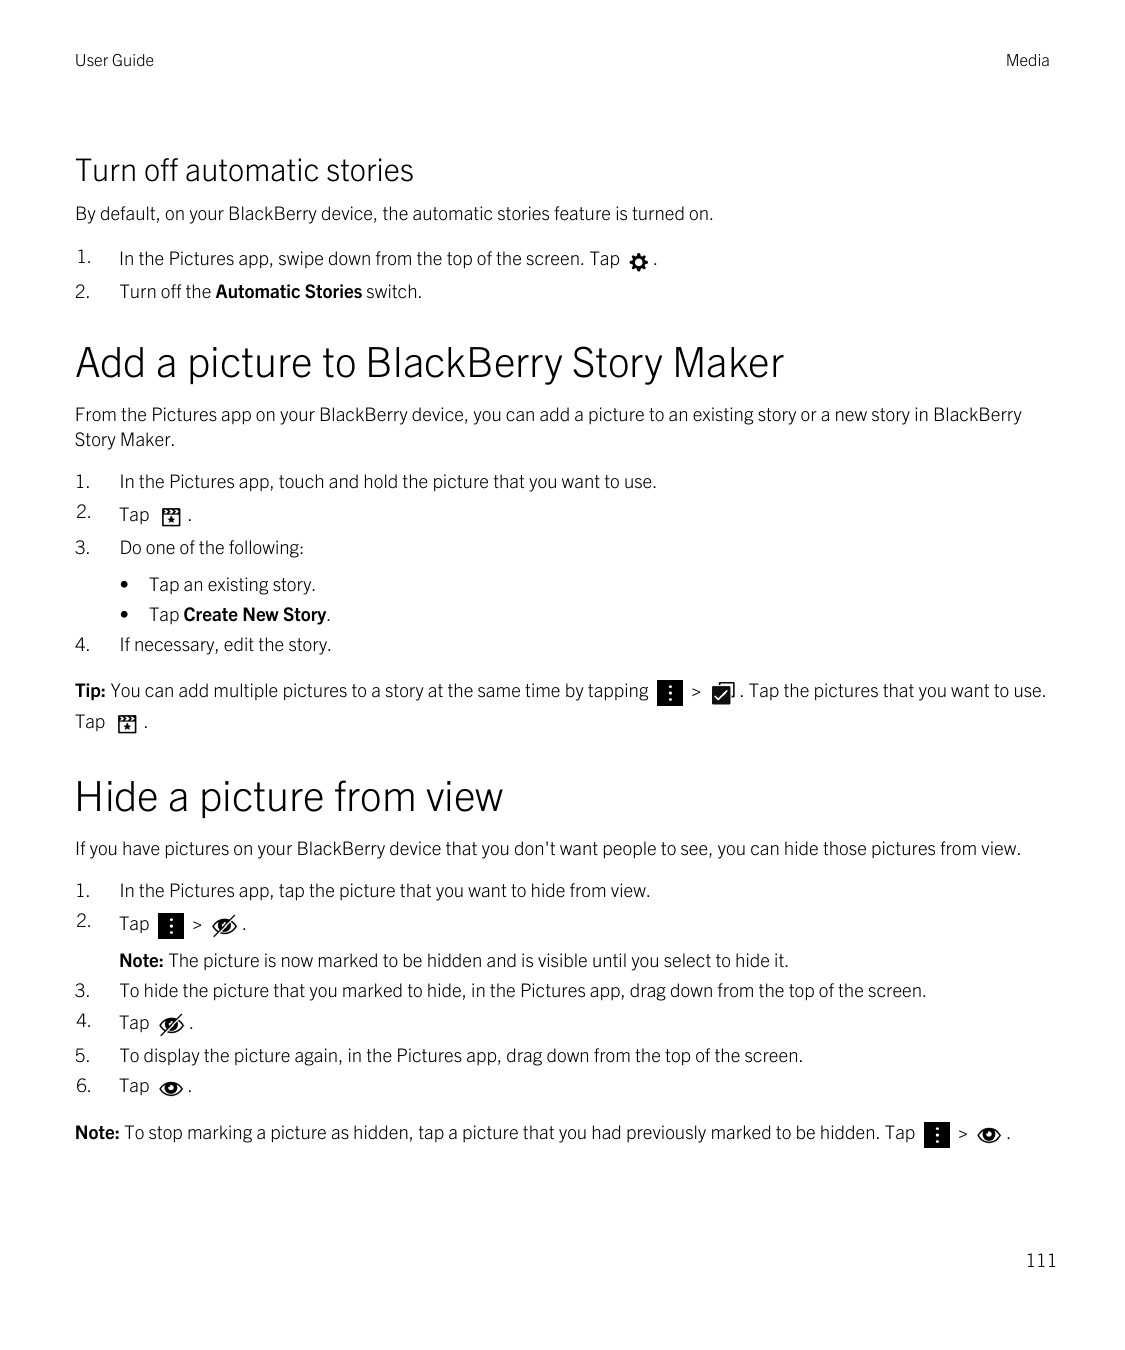 User GuideMediaTurn off automatic storiesBy default, on your BlackBerry device, the automatic stories feature is turned on.1.In 